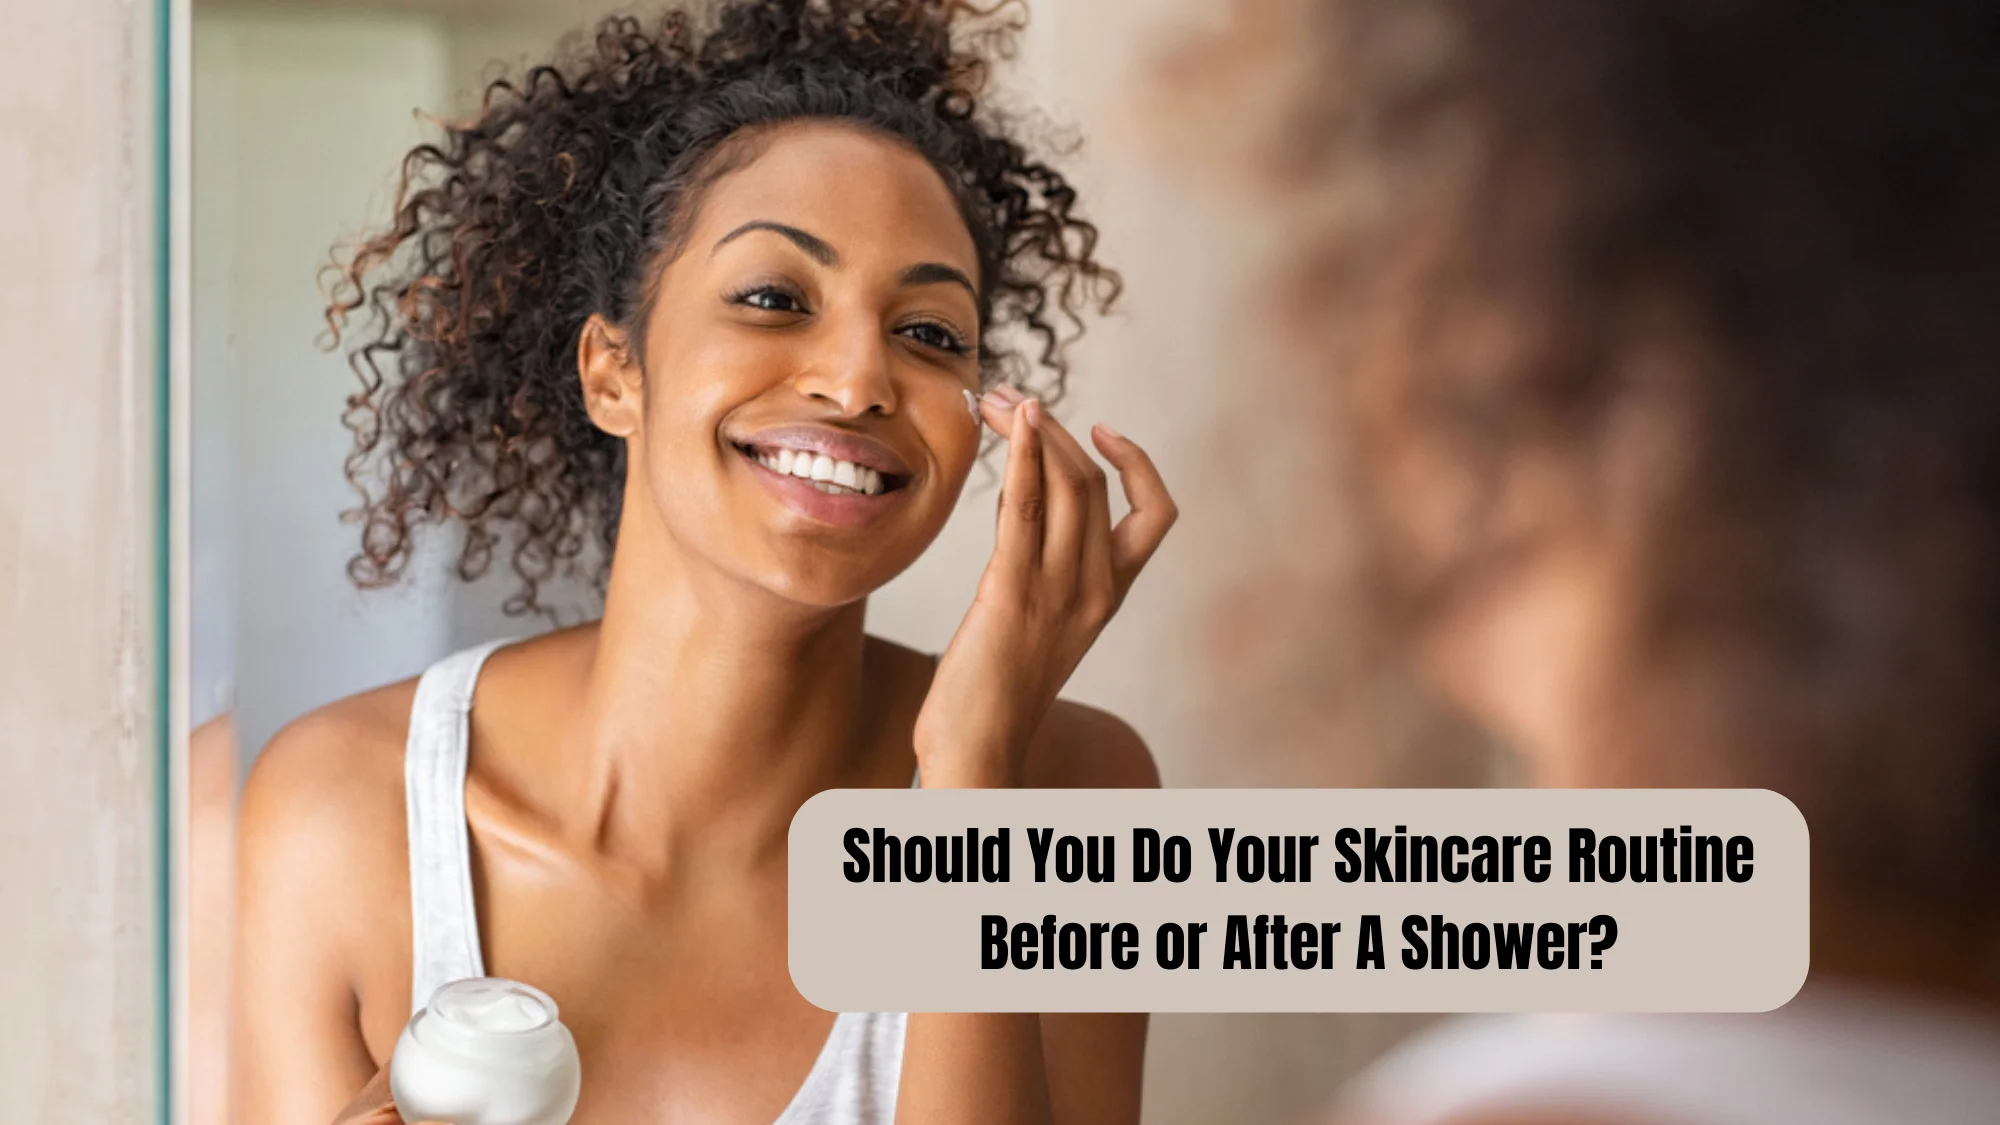 Should You Do Your Skincare Routine Before or After A Shower?